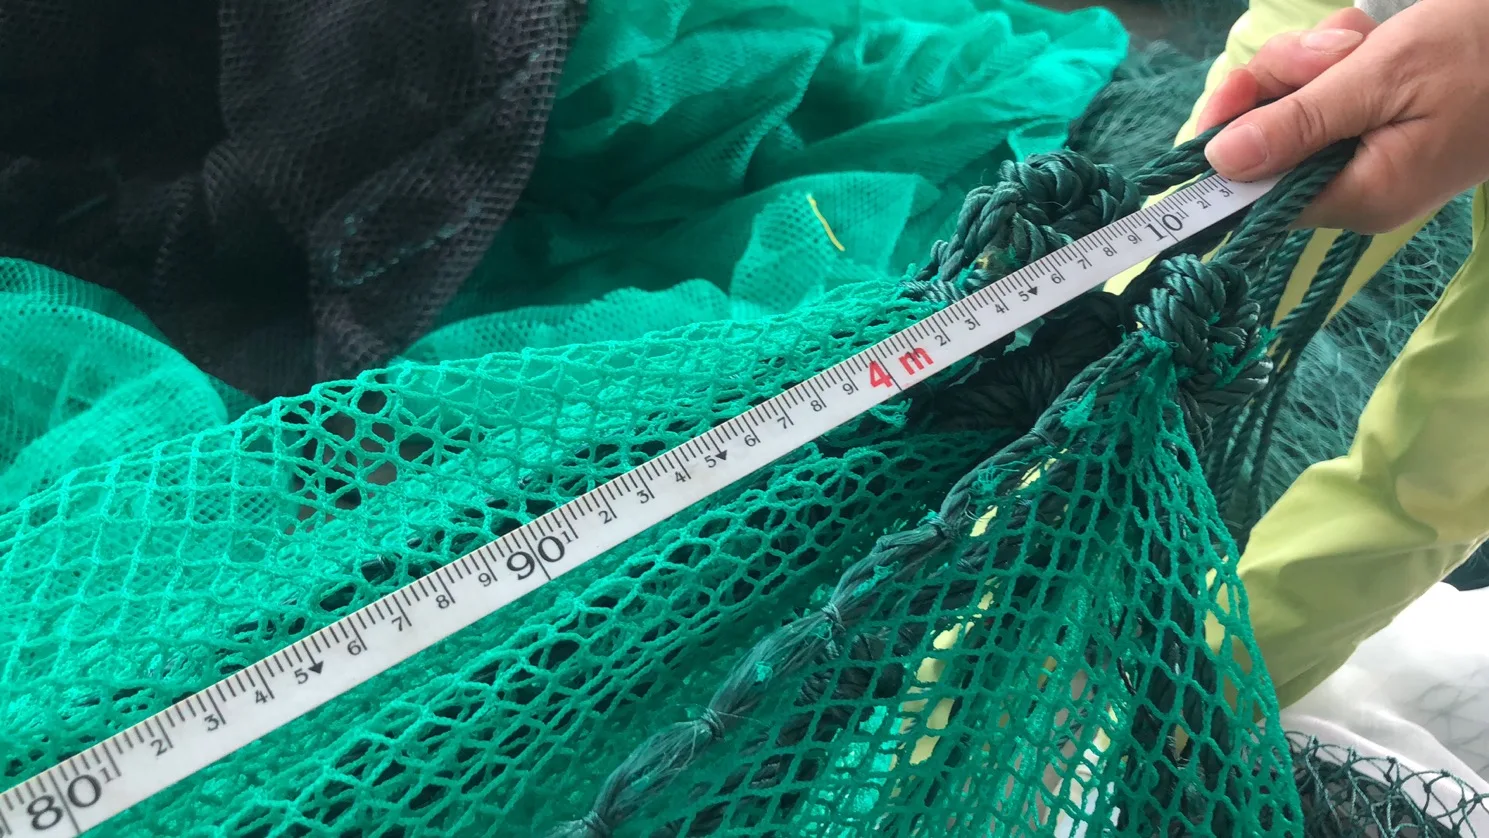 Buy 1.0 Floating Fishing Net for Kayak Online at Low Prices in India 